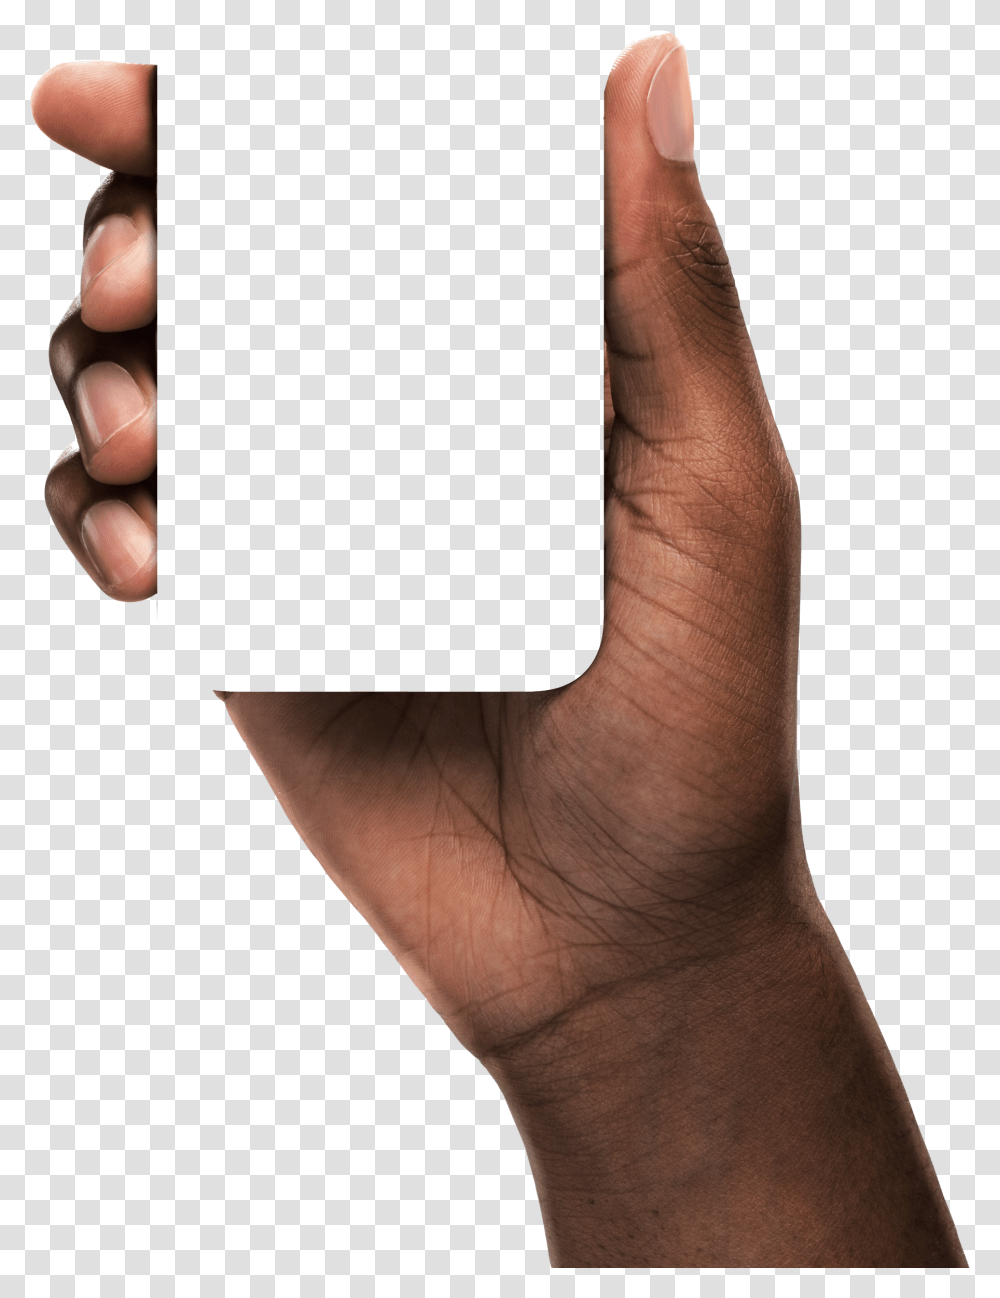 Mobile Shopping Gif Black Hand Holding Iphone, Person, Human, Electronics, Mobile Phone Transparent Png